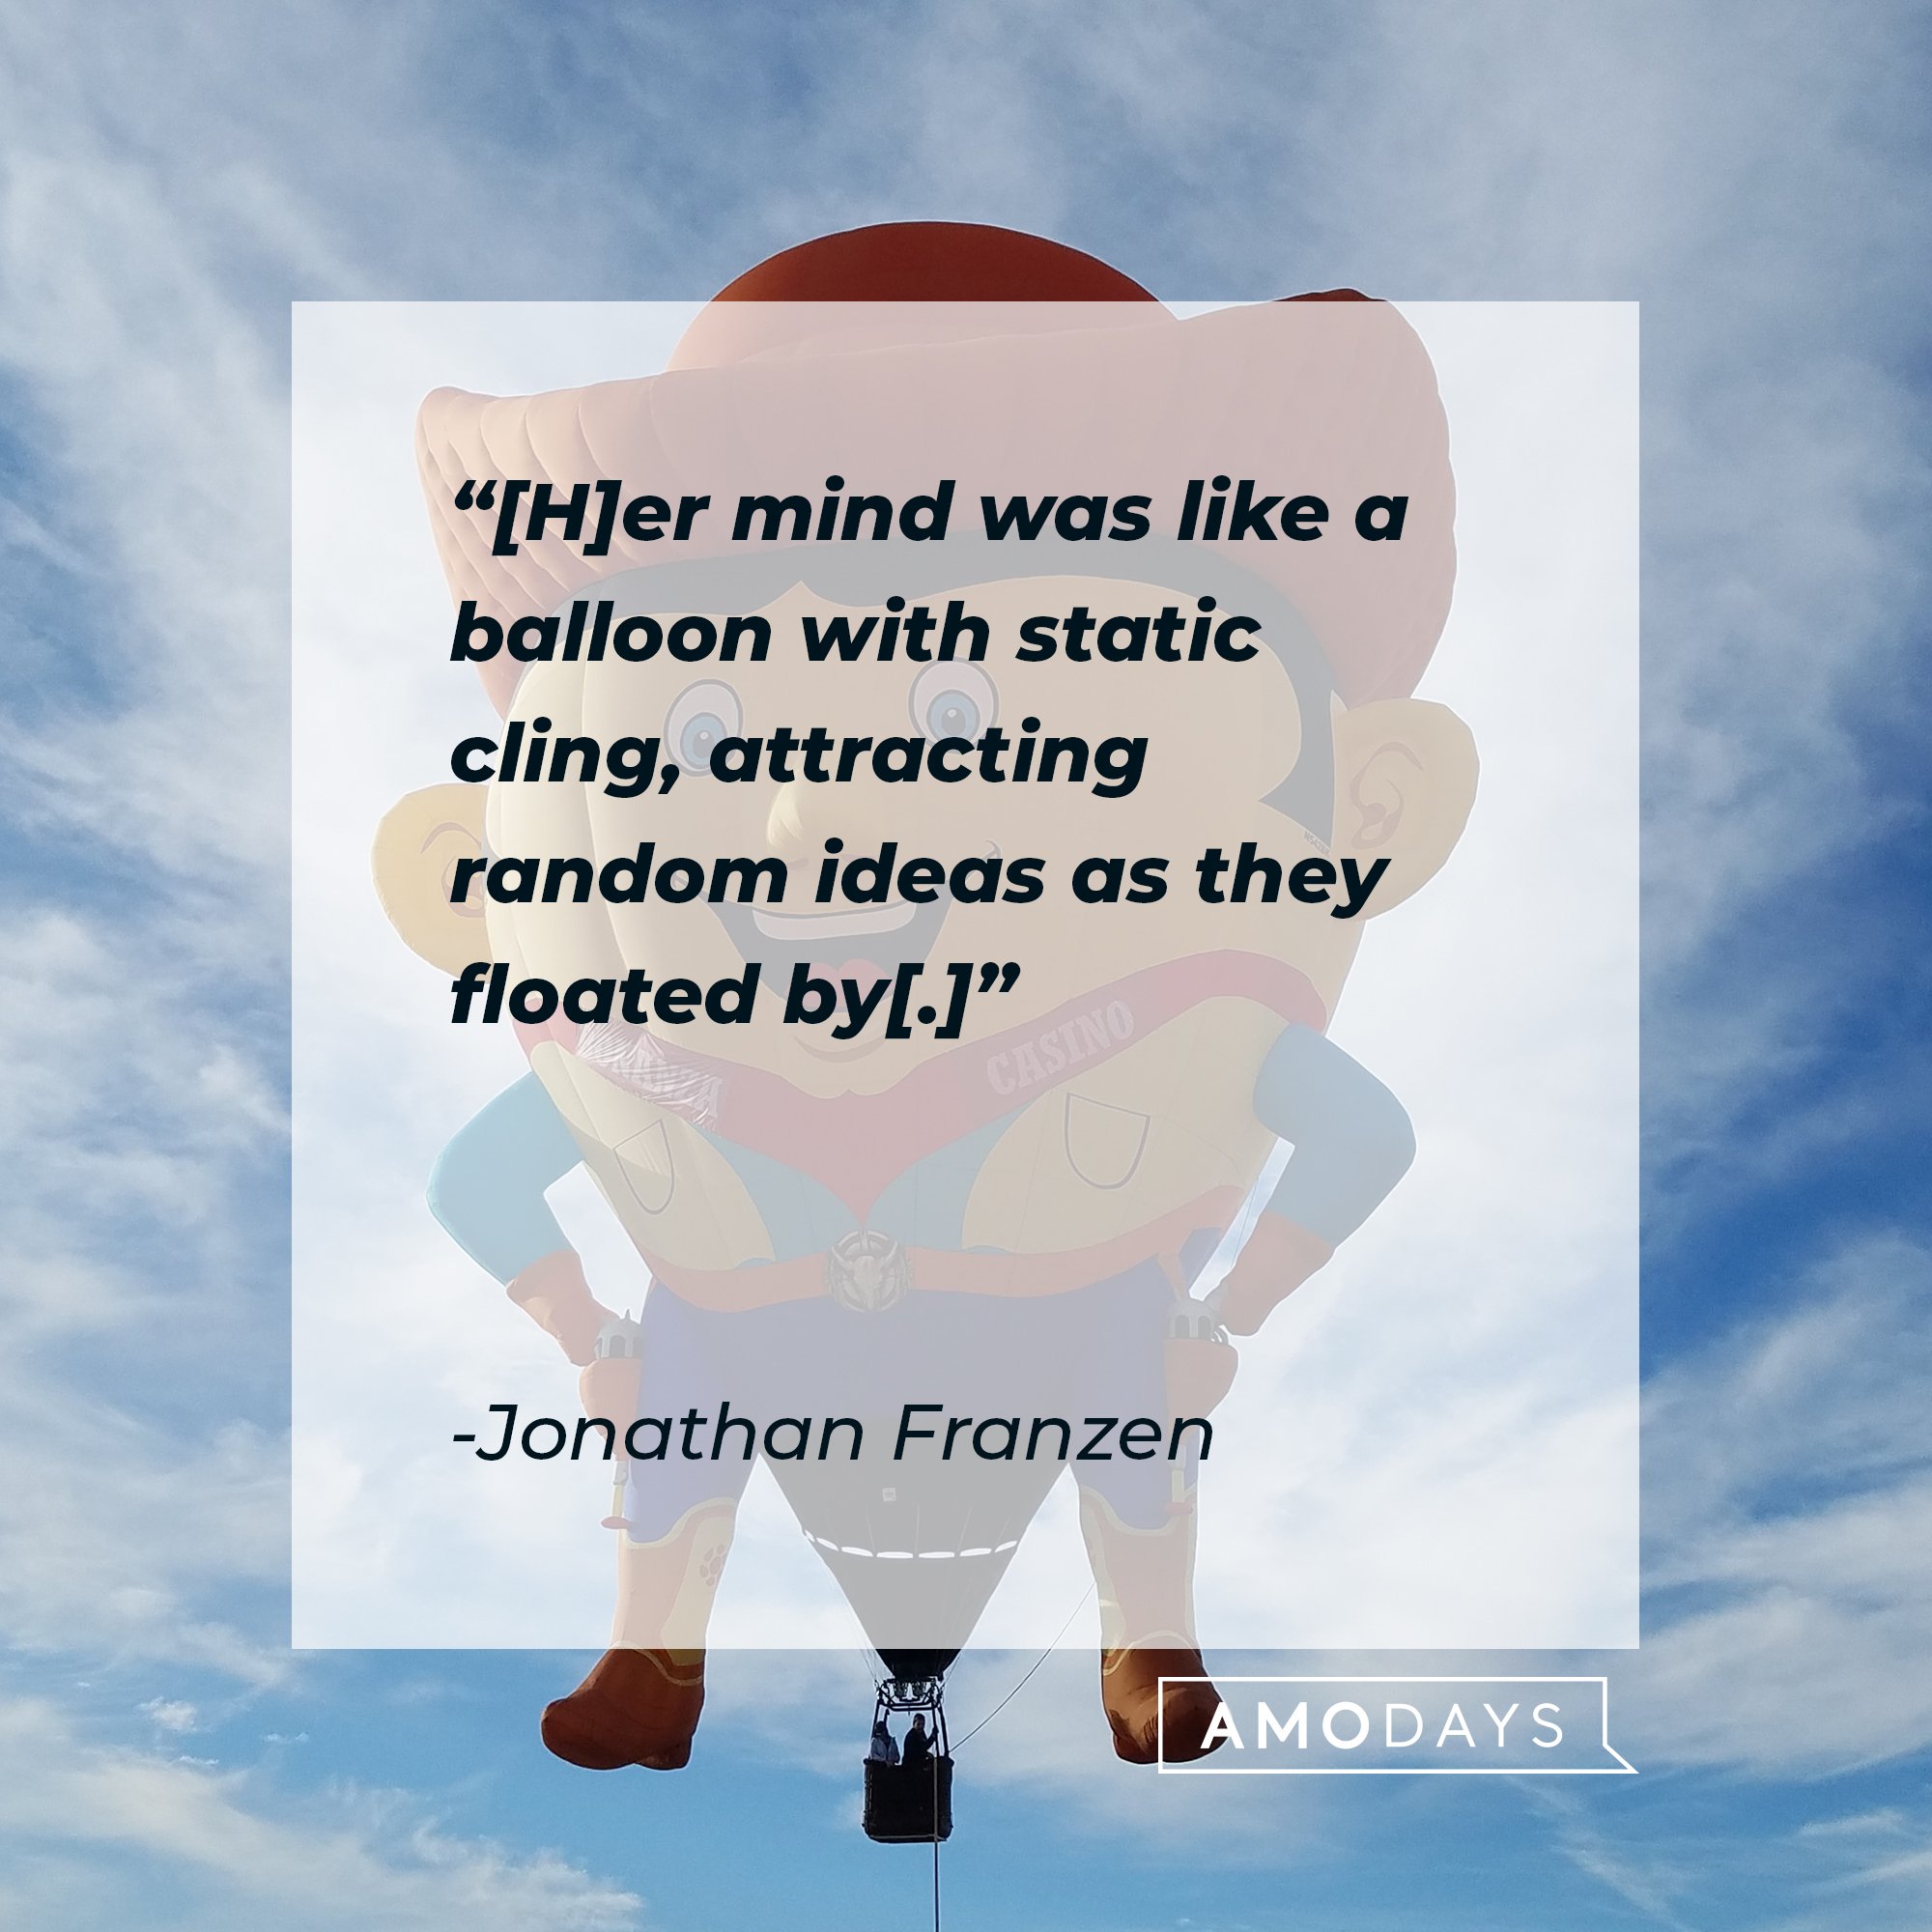 Jonathan Franzen’s quote: "[H]er mind was like a balloon with static cling, attracting random ideas as they floated by[.]" | Image: AmoDays 